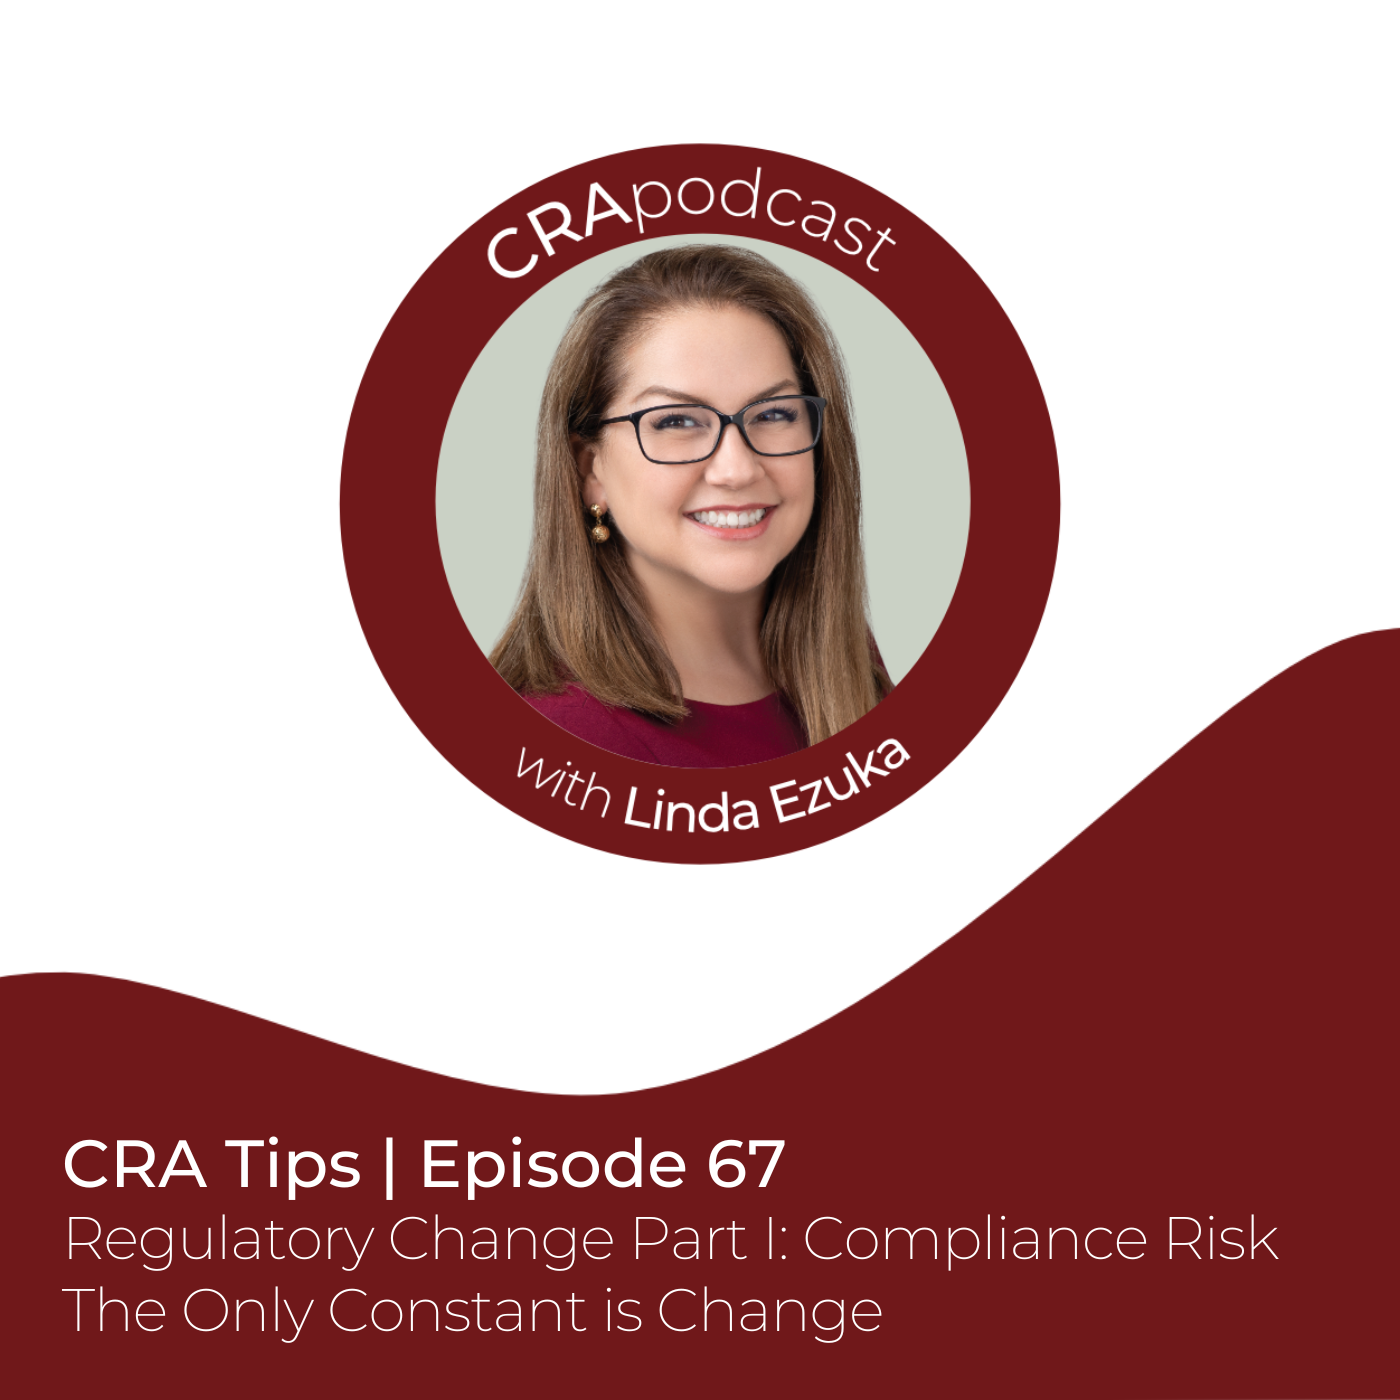 Episode 67: CRA Tips: CRA Tips: Regulatory Change Part I: Compliance Risk – The Only Constant is Change